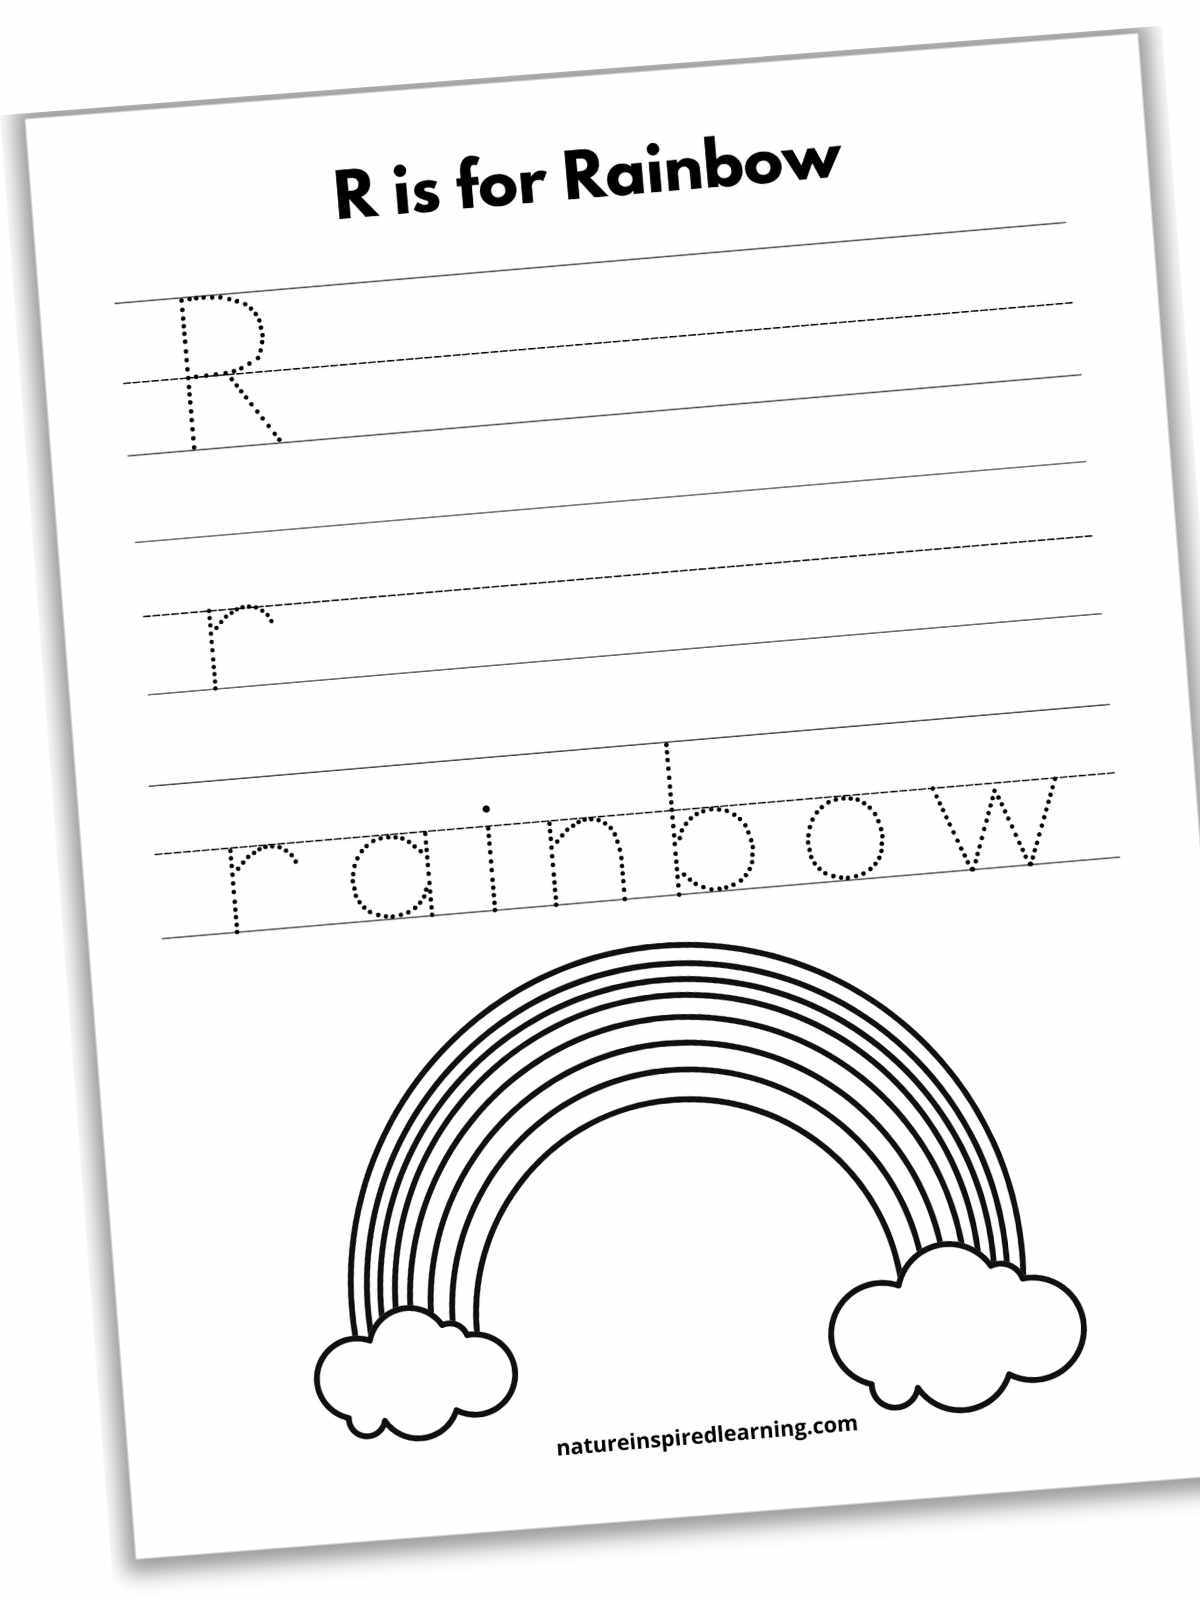 R is for Rainbow worksheet with capital and lowercase r's to trace on lines and a large black and white rainbow with clouds on bottom